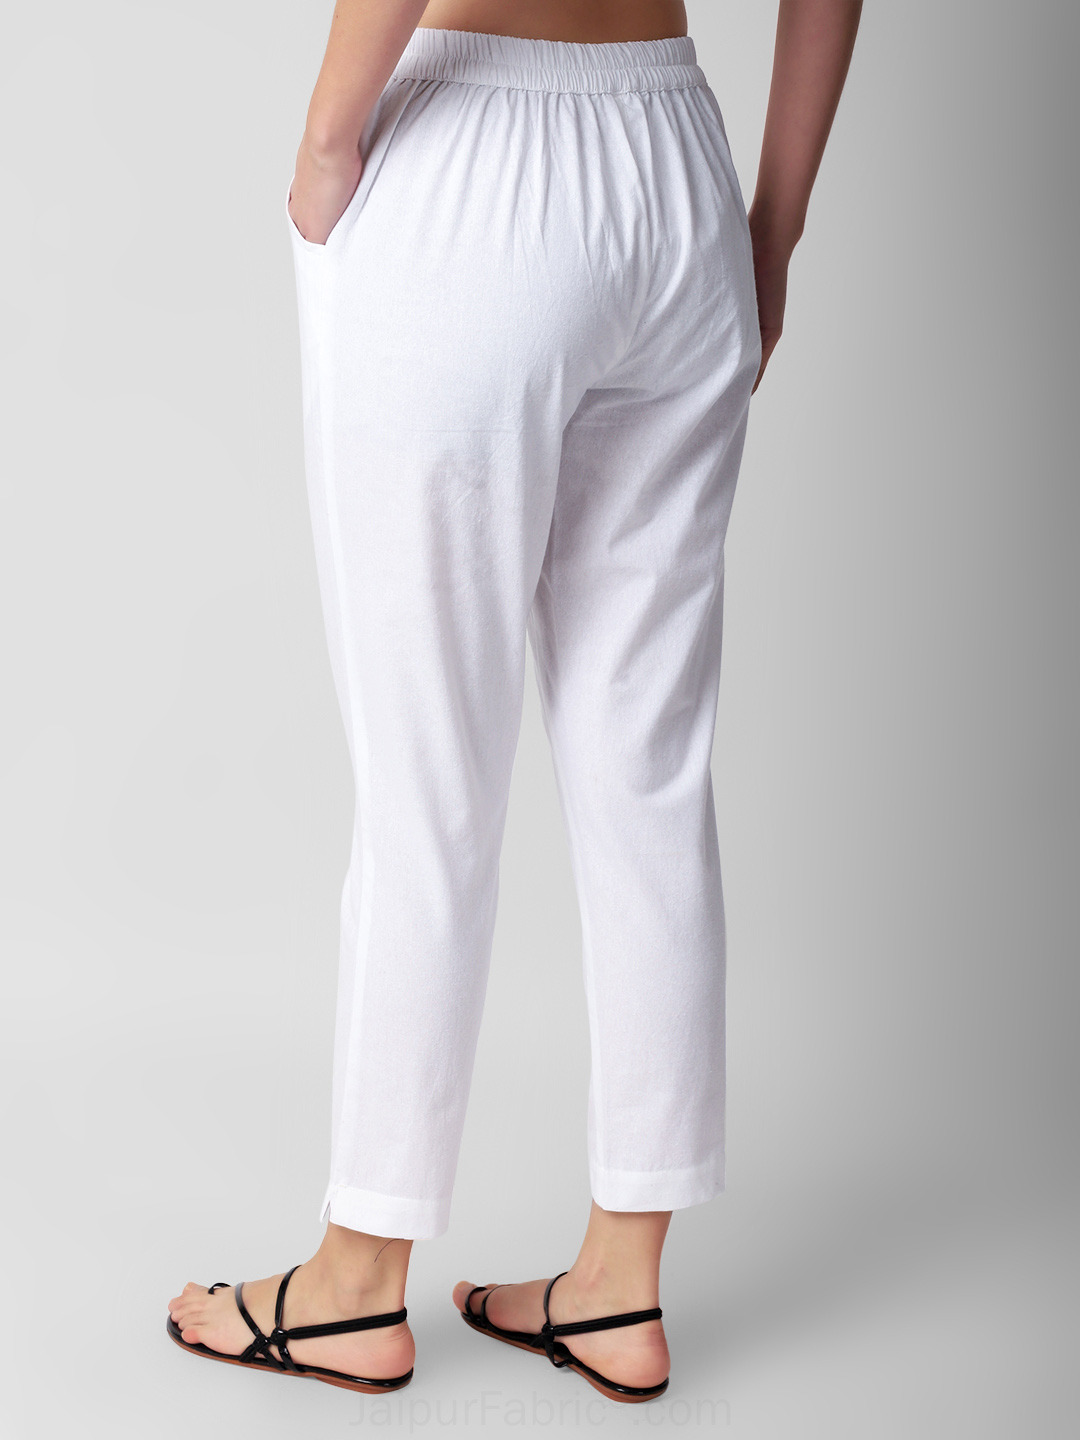 Fab Queens Slim Fit Women White Trousers - Buy Fab Queens Slim Fit Women  White Trousers Online at Best Prices in India | Flipkart.com